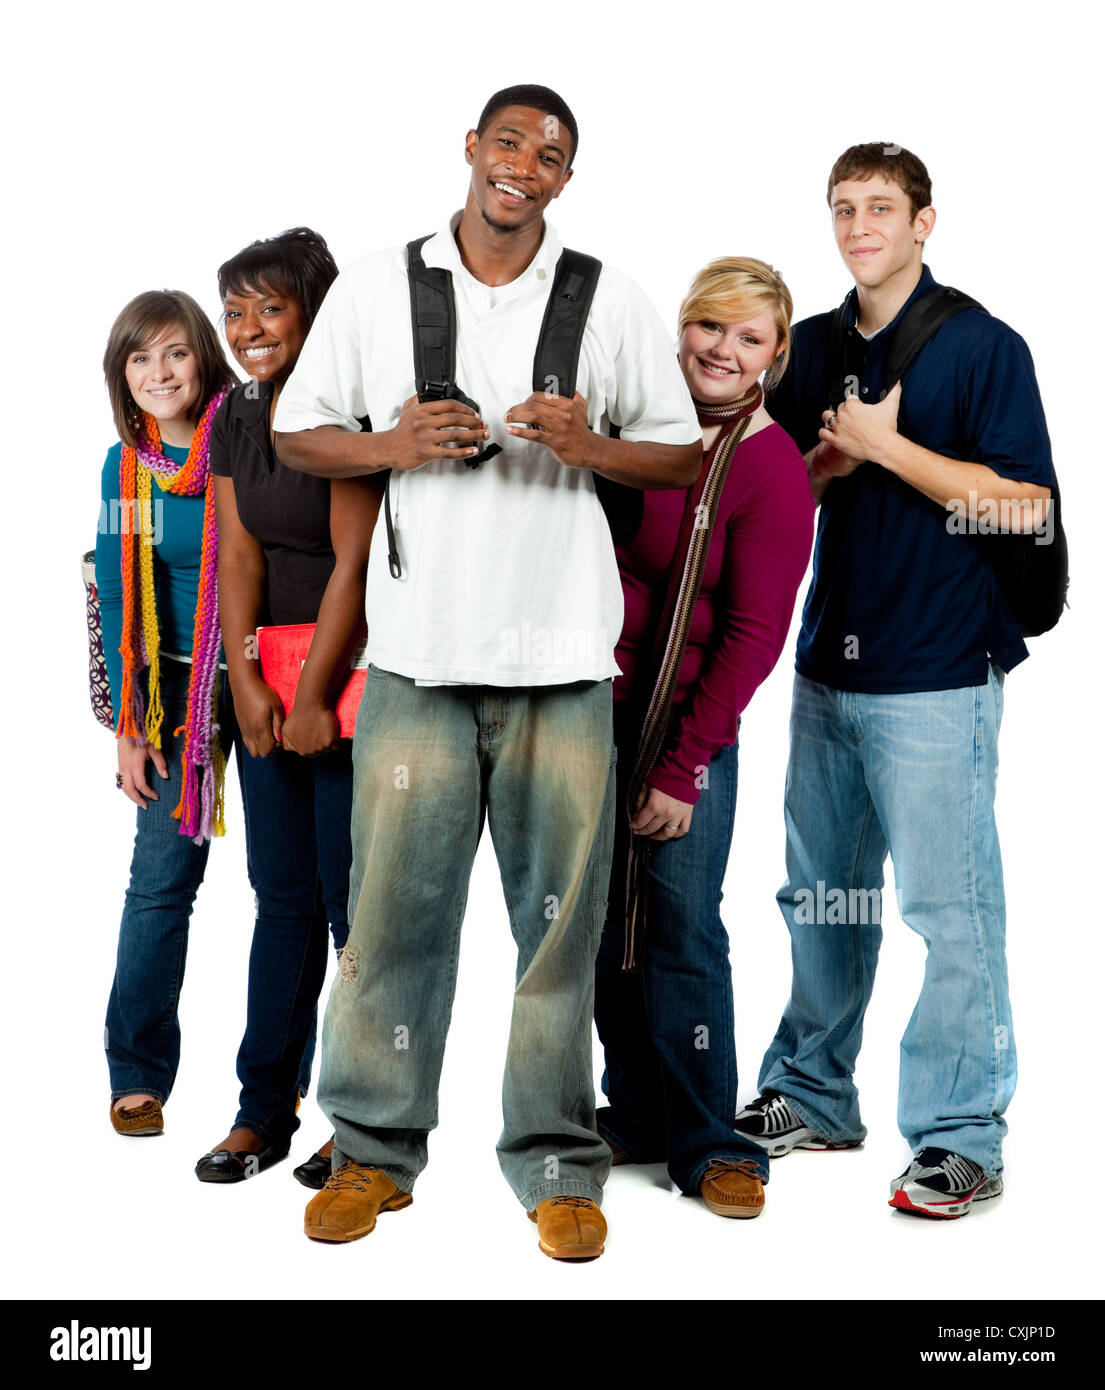 A group of happy multi-racial college students/friends holding backpacks on a white background Stock Photo